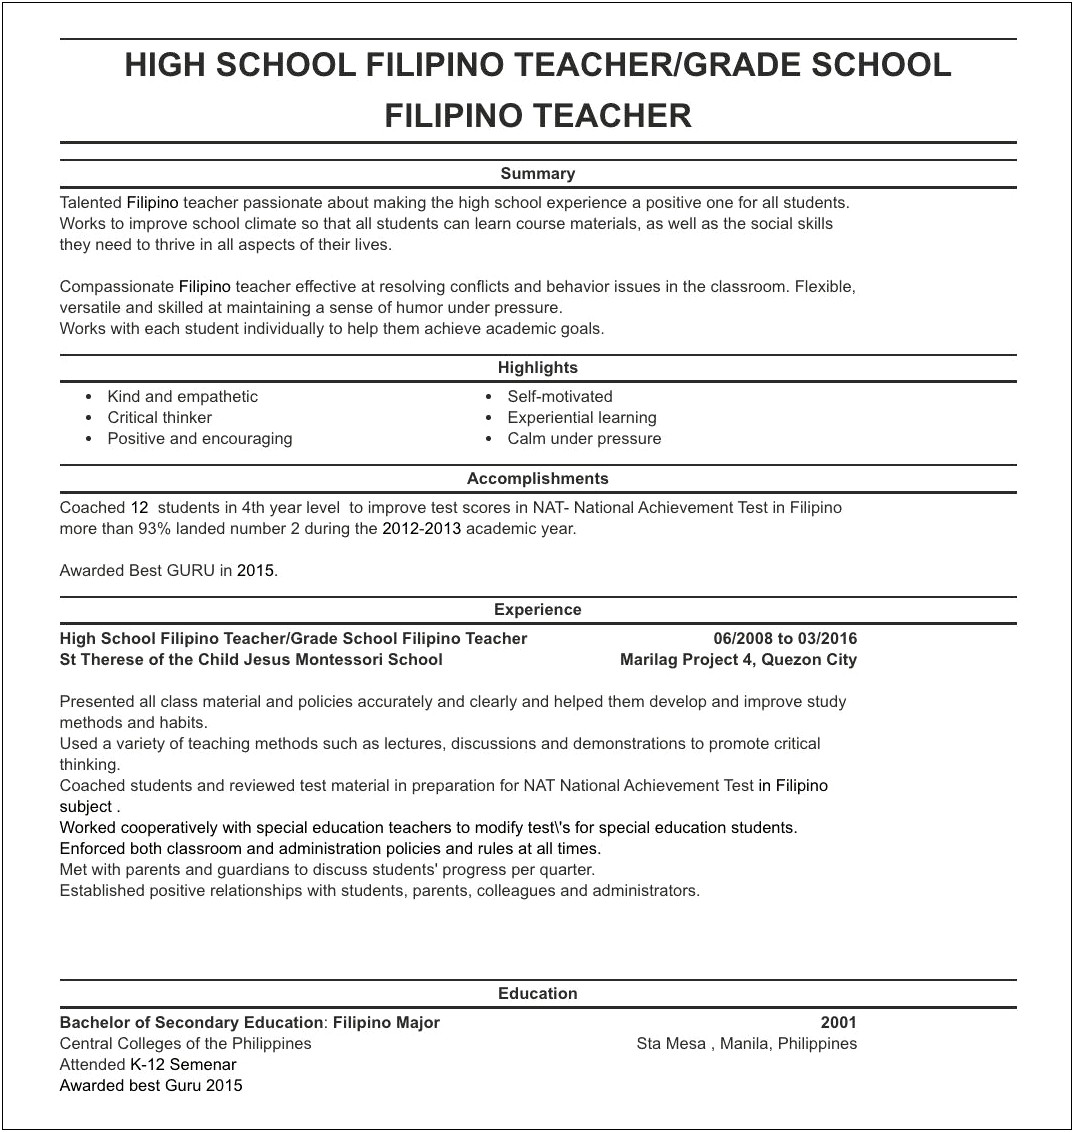 Resume Of A Teacher With No Experience